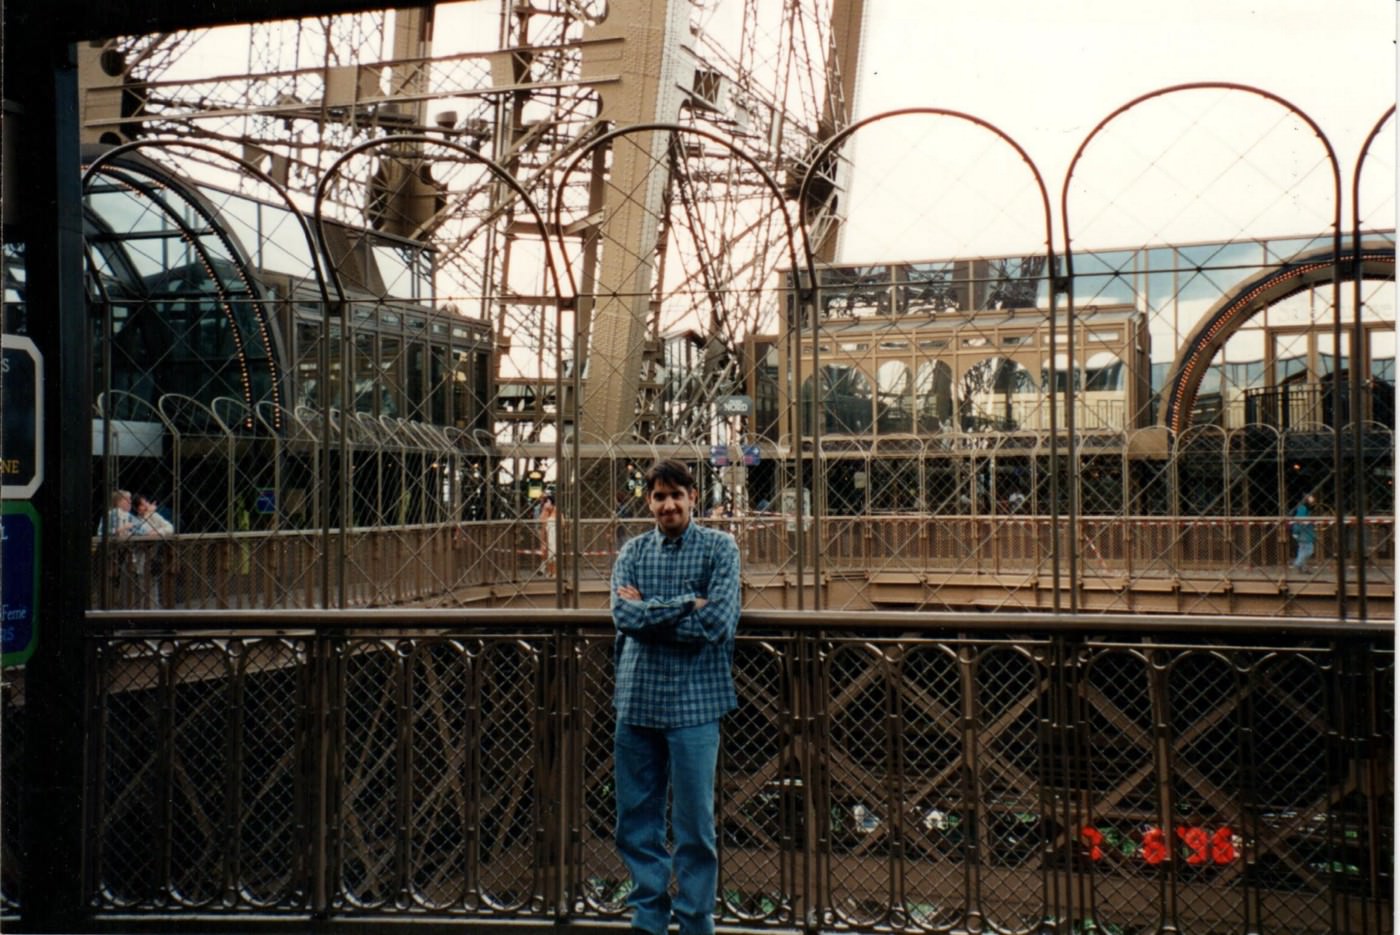 Author visit to Eiffel Tower in the summer of 1996.